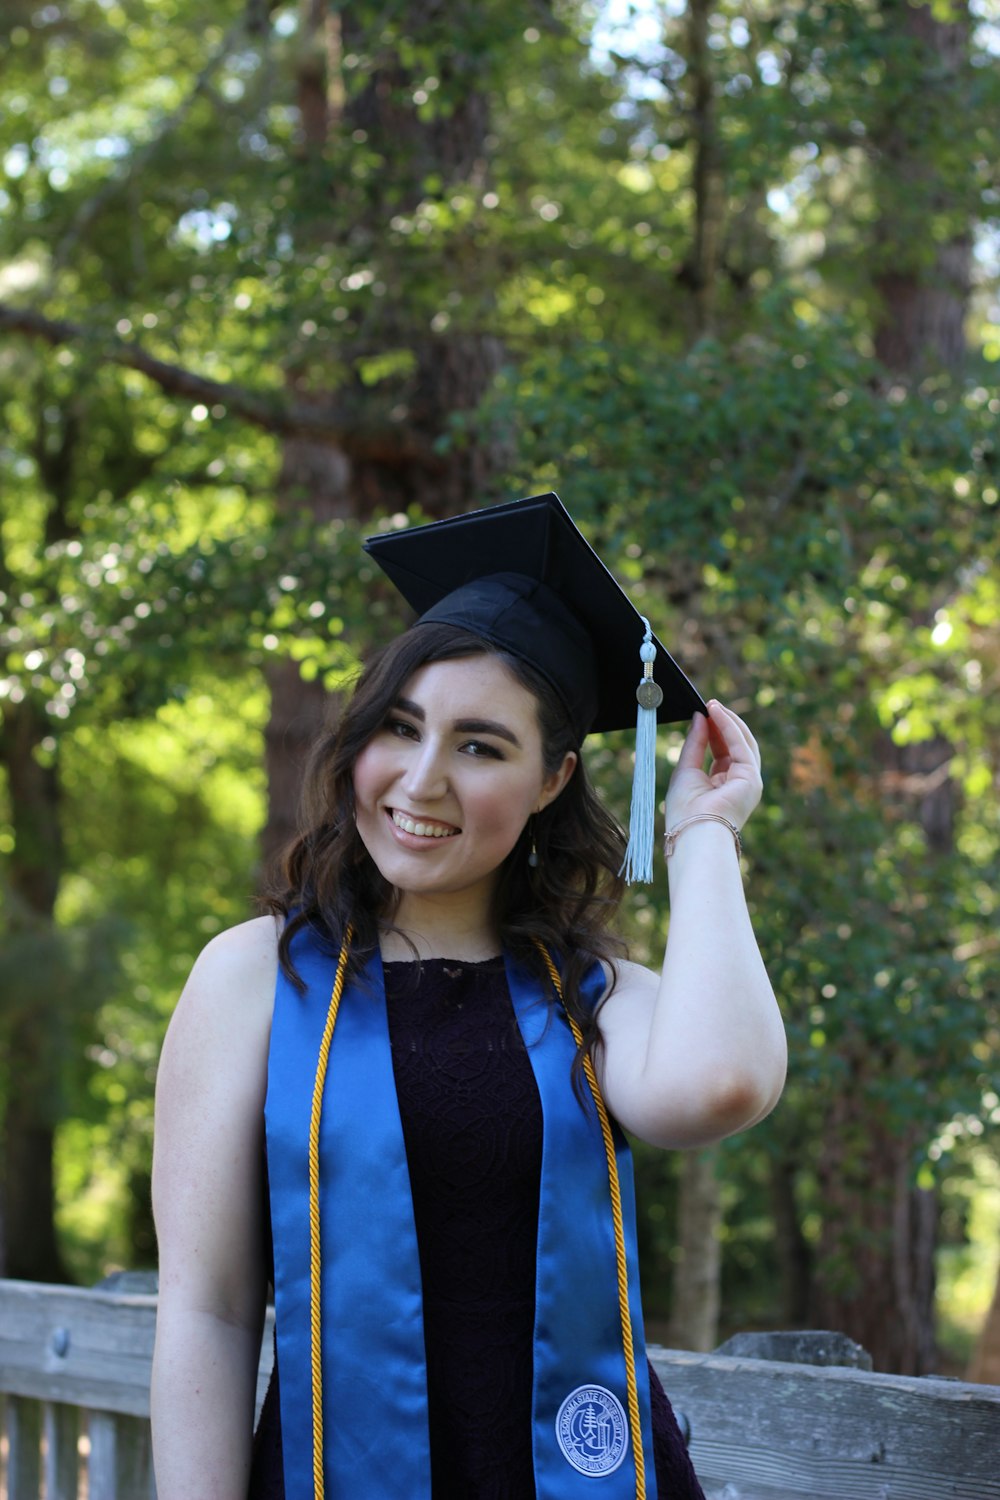 woman in blue and black academic dress smiling